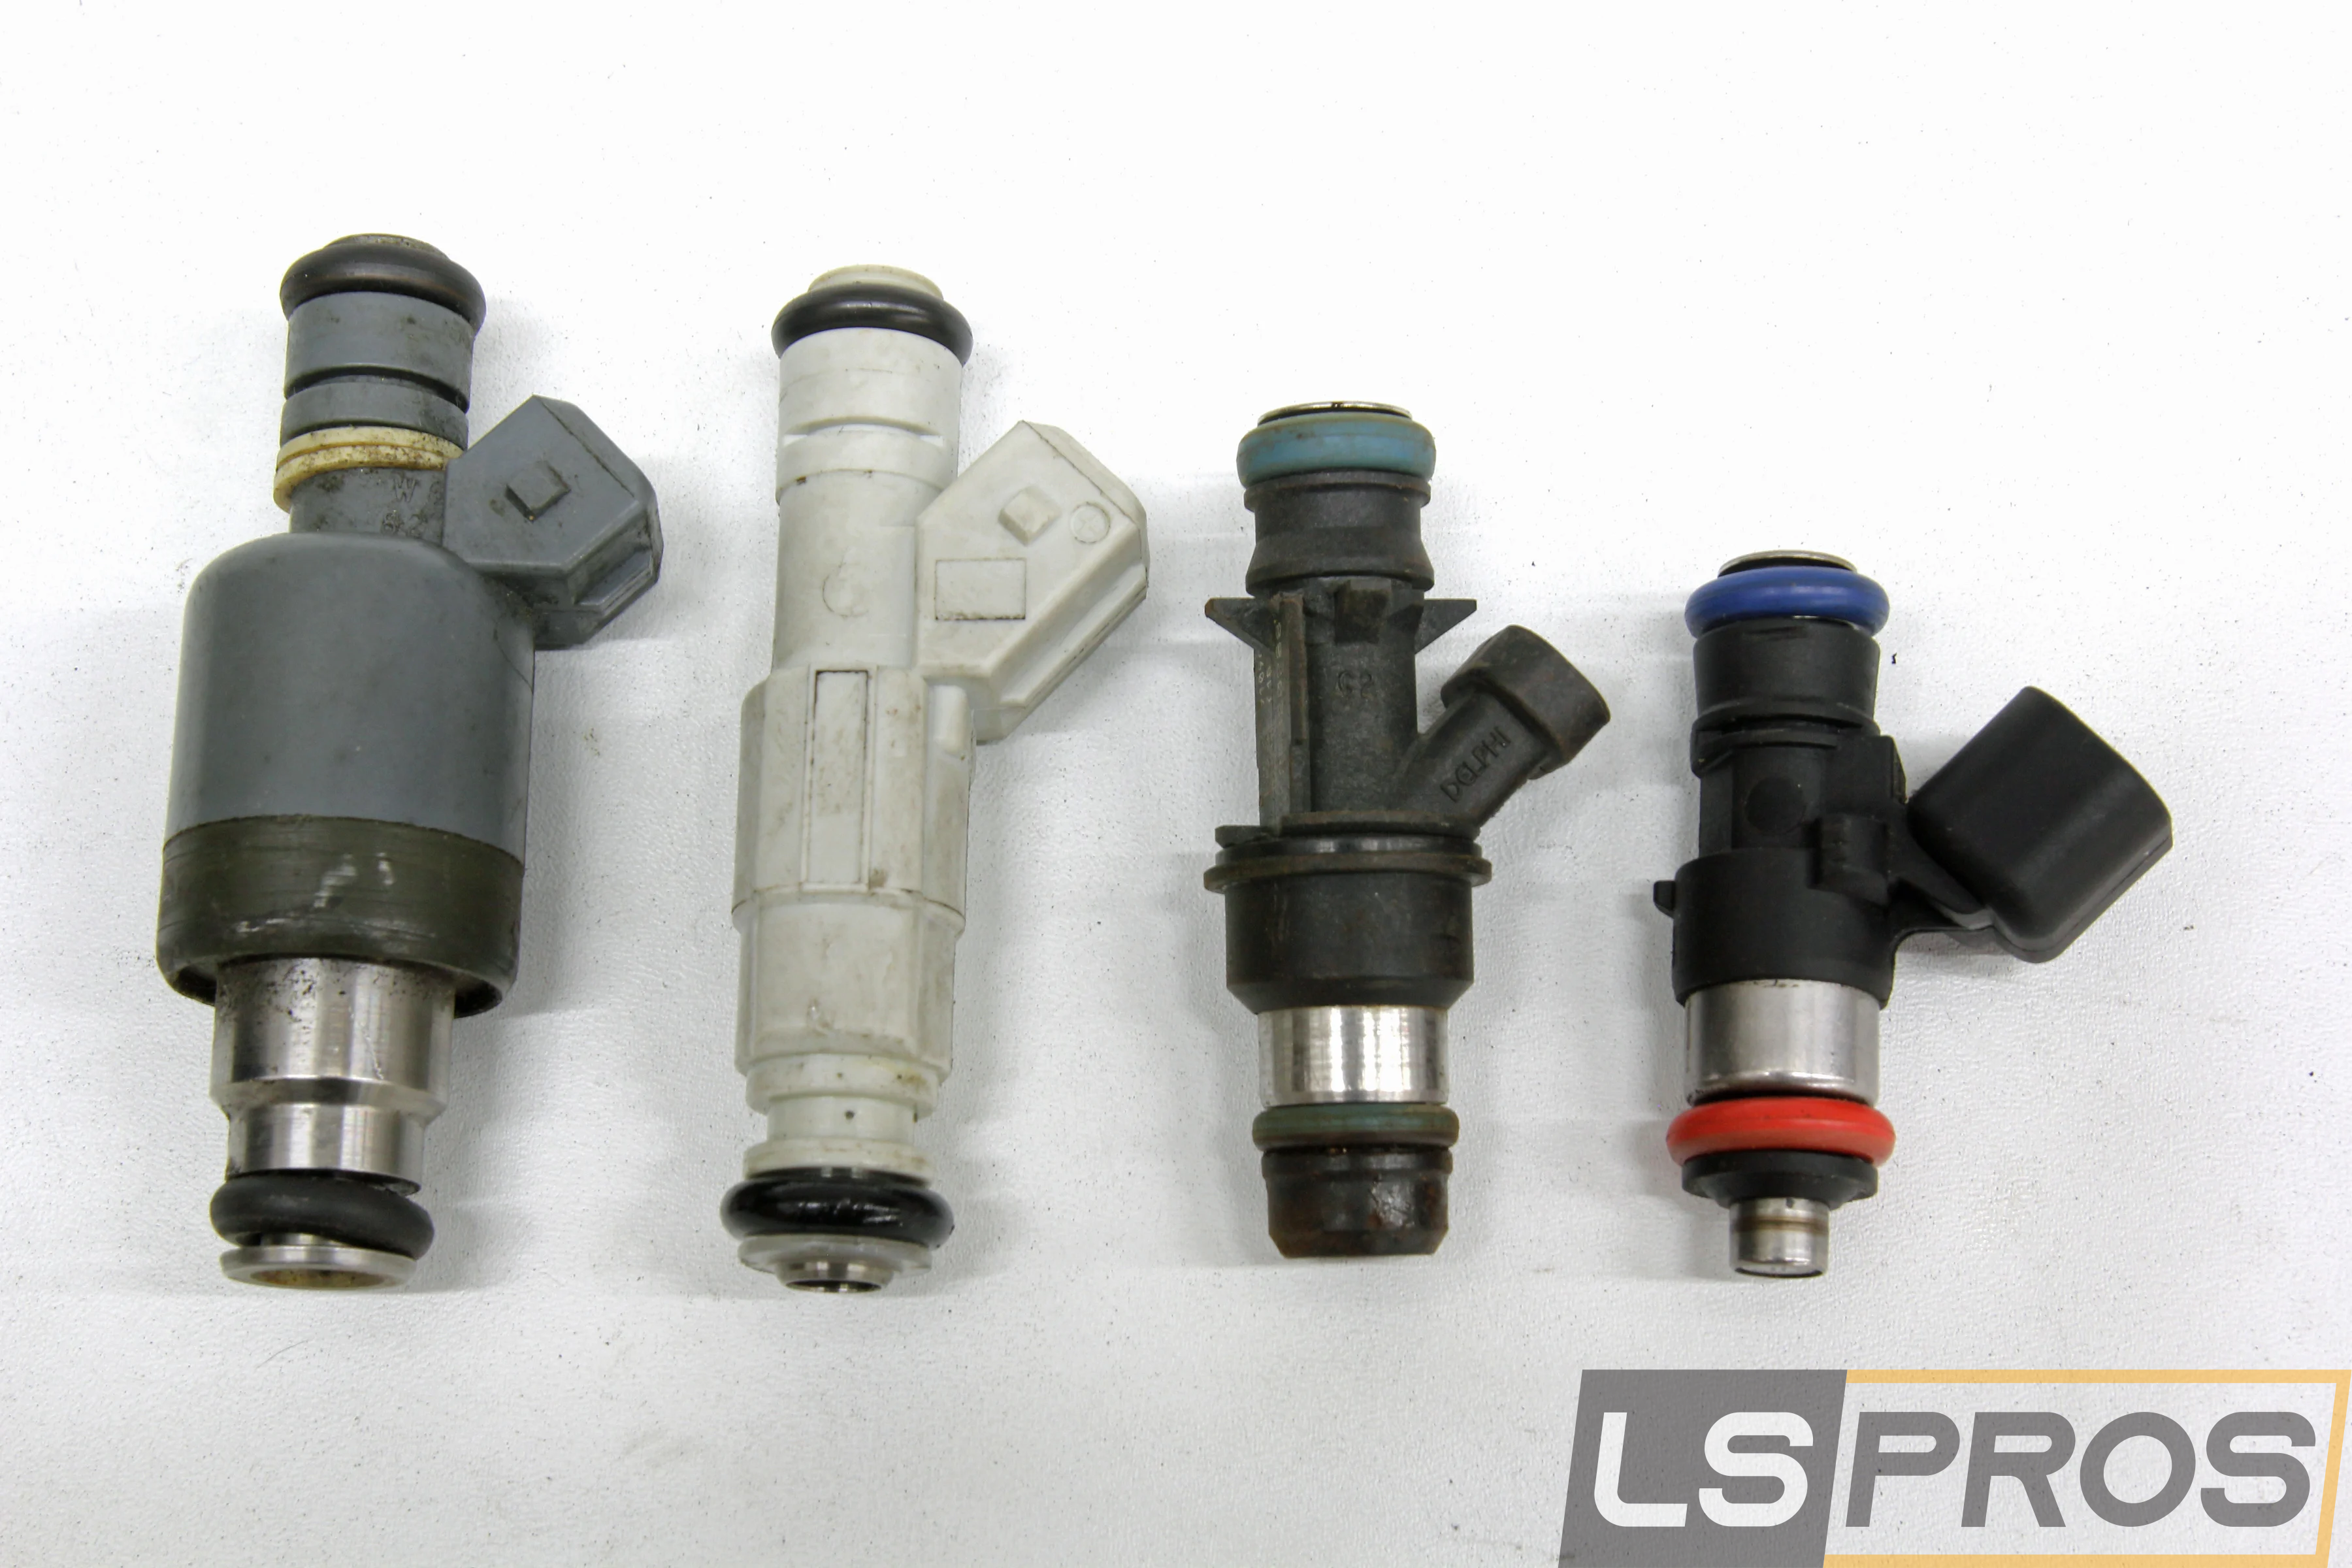 This injector family portrait includes four of the five popular GM fuel injectors. From left to right: original Bosch Jetronic EV1, the tall LS1 style followed by the early LS truck injector, and on the far right the late LS3 EV6 style. The one missing version is the late truck injector that is the same height as the early truck LS piece but using the EV6 electrical connector.